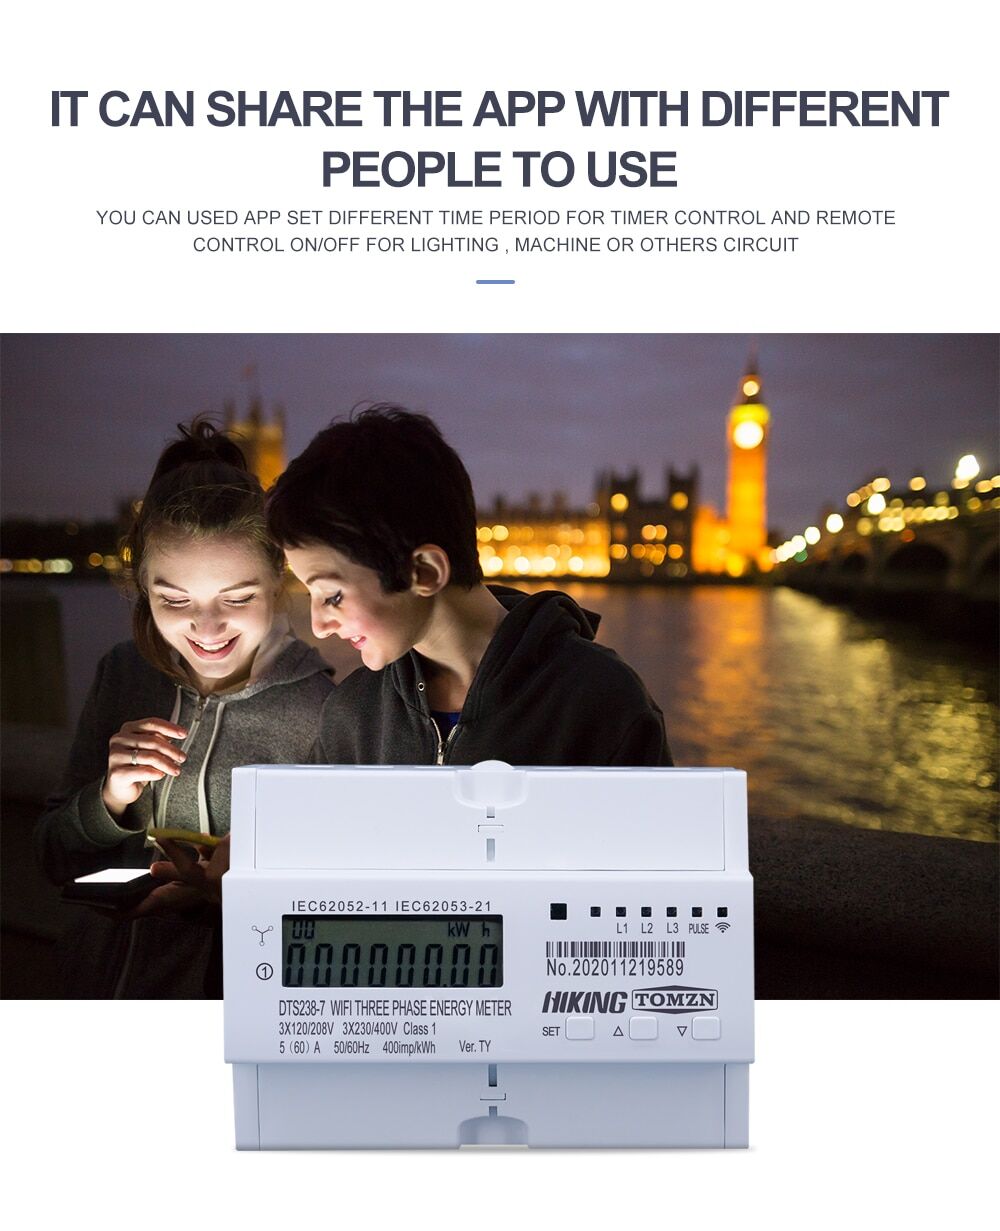 380V wifi power consumption meter with Tuya Smartlife app € 110,18